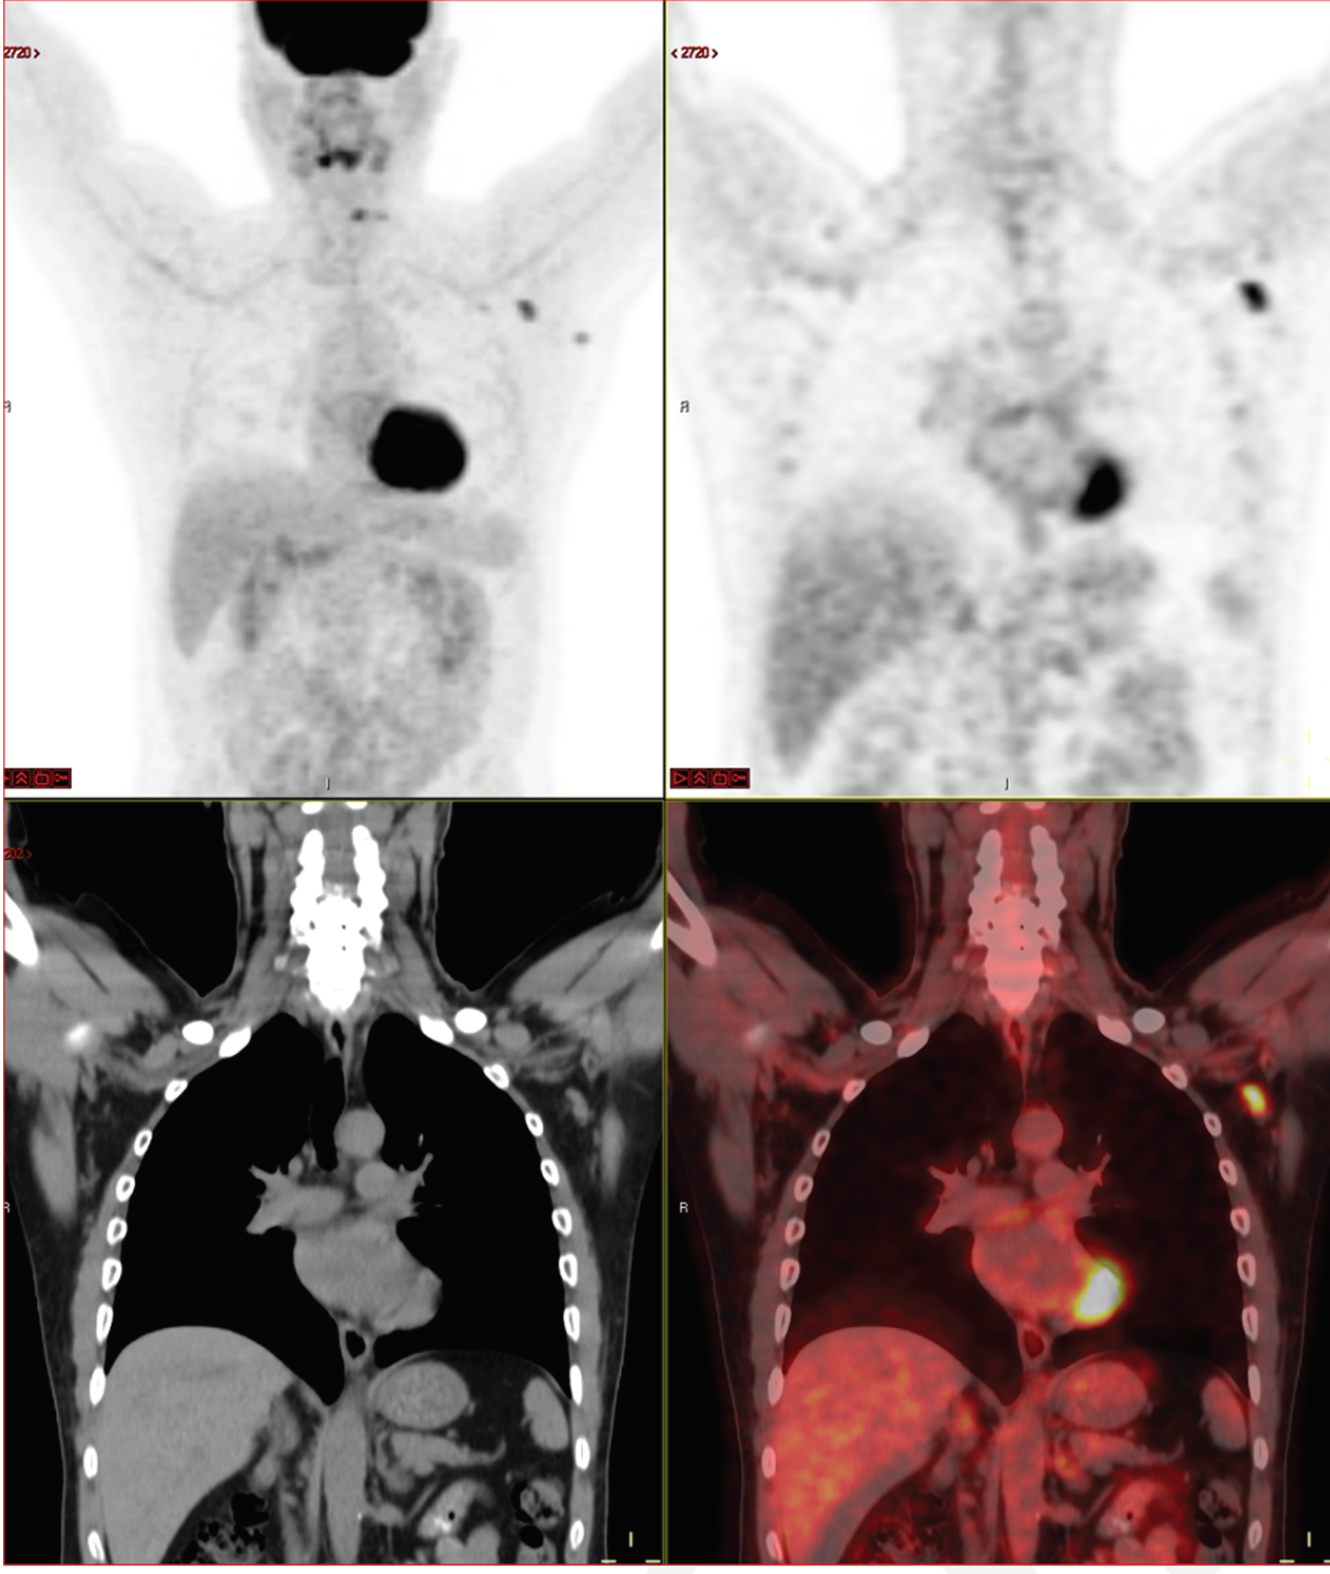 A 63-year-old multiple myeloma patient, with skeletal pain. New FDG avid axillary lymphadenopathy 62 days (9 weeks) after second mRNA vaccine dose.

Credit: RSNA